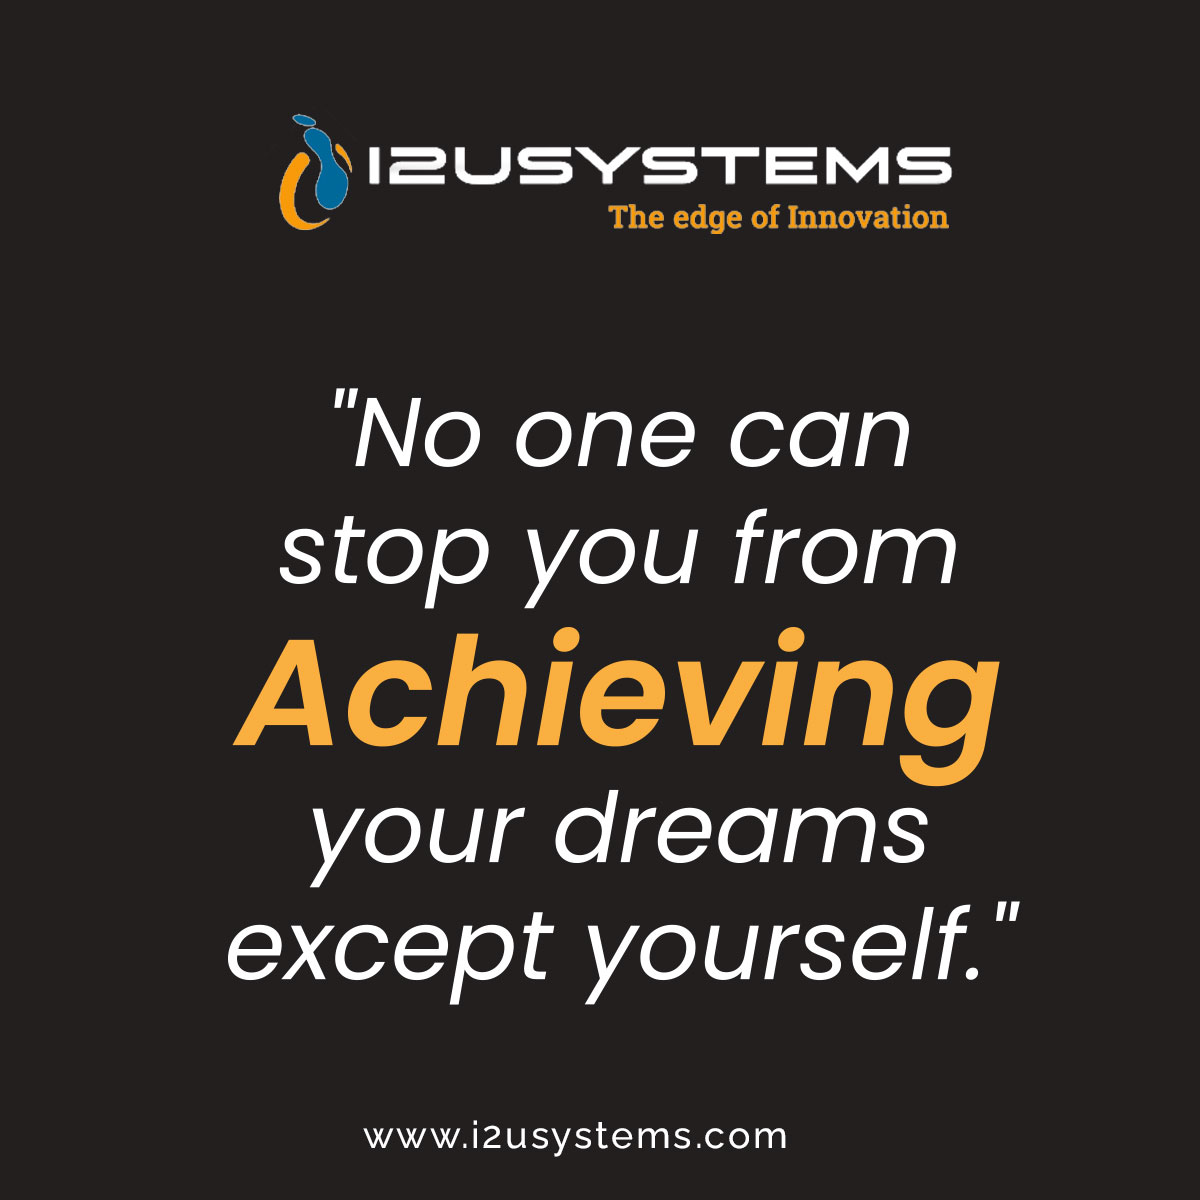 'No one can stop you from 𝐀𝐜𝐡𝐢𝐞𝐯𝐢𝐧𝐠 your dreams exceptt yourself.' #i2usystems #c2crequirements #w2jobs #directclient #directclients #i2u #i2usystemsinc #usaitjobs #usajobs #jobs #recruiters #benchsales #IOT #motivtional #quote #achieving #dreams #yourself